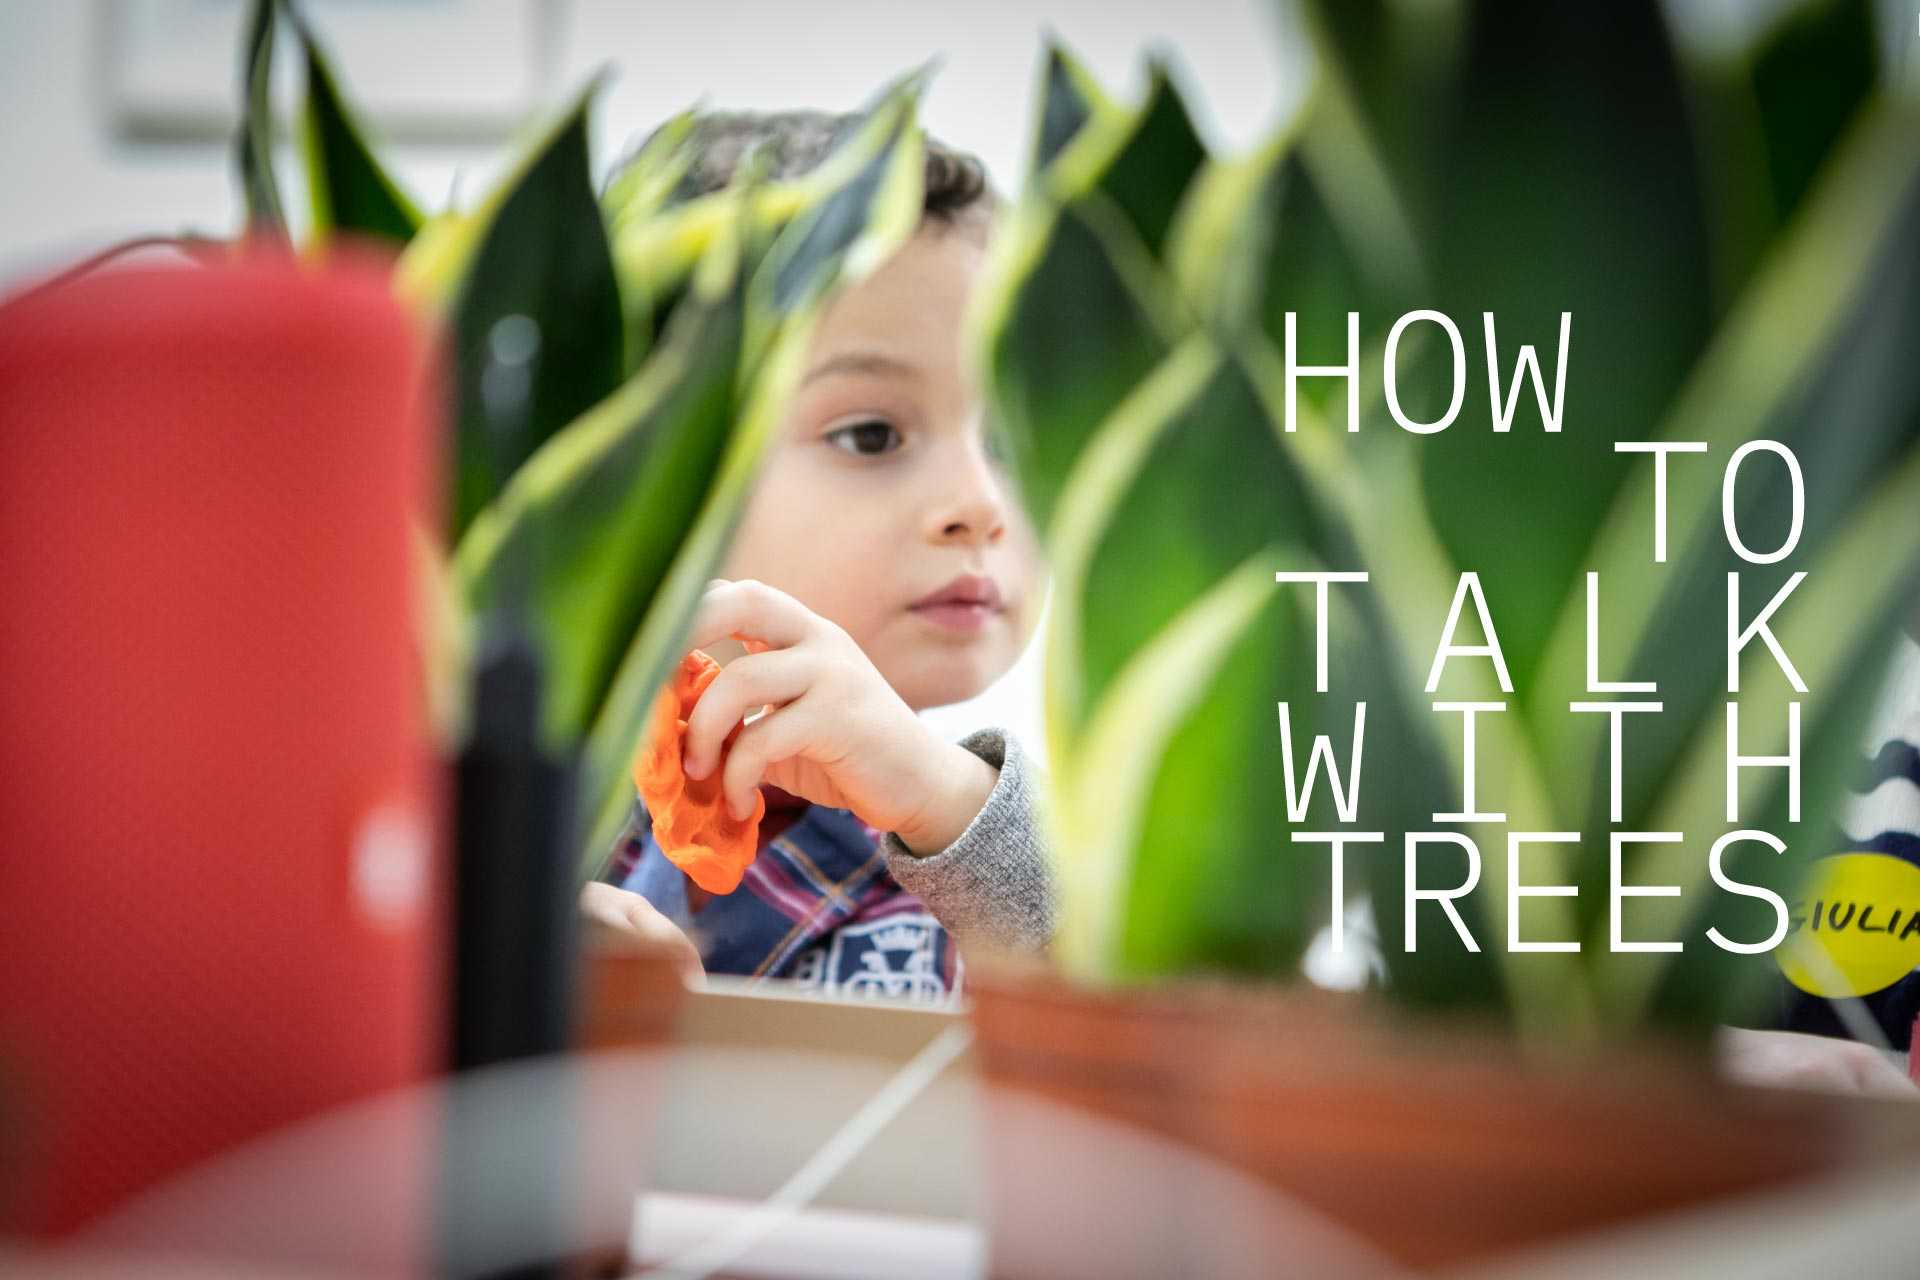 How to Talk With Trees